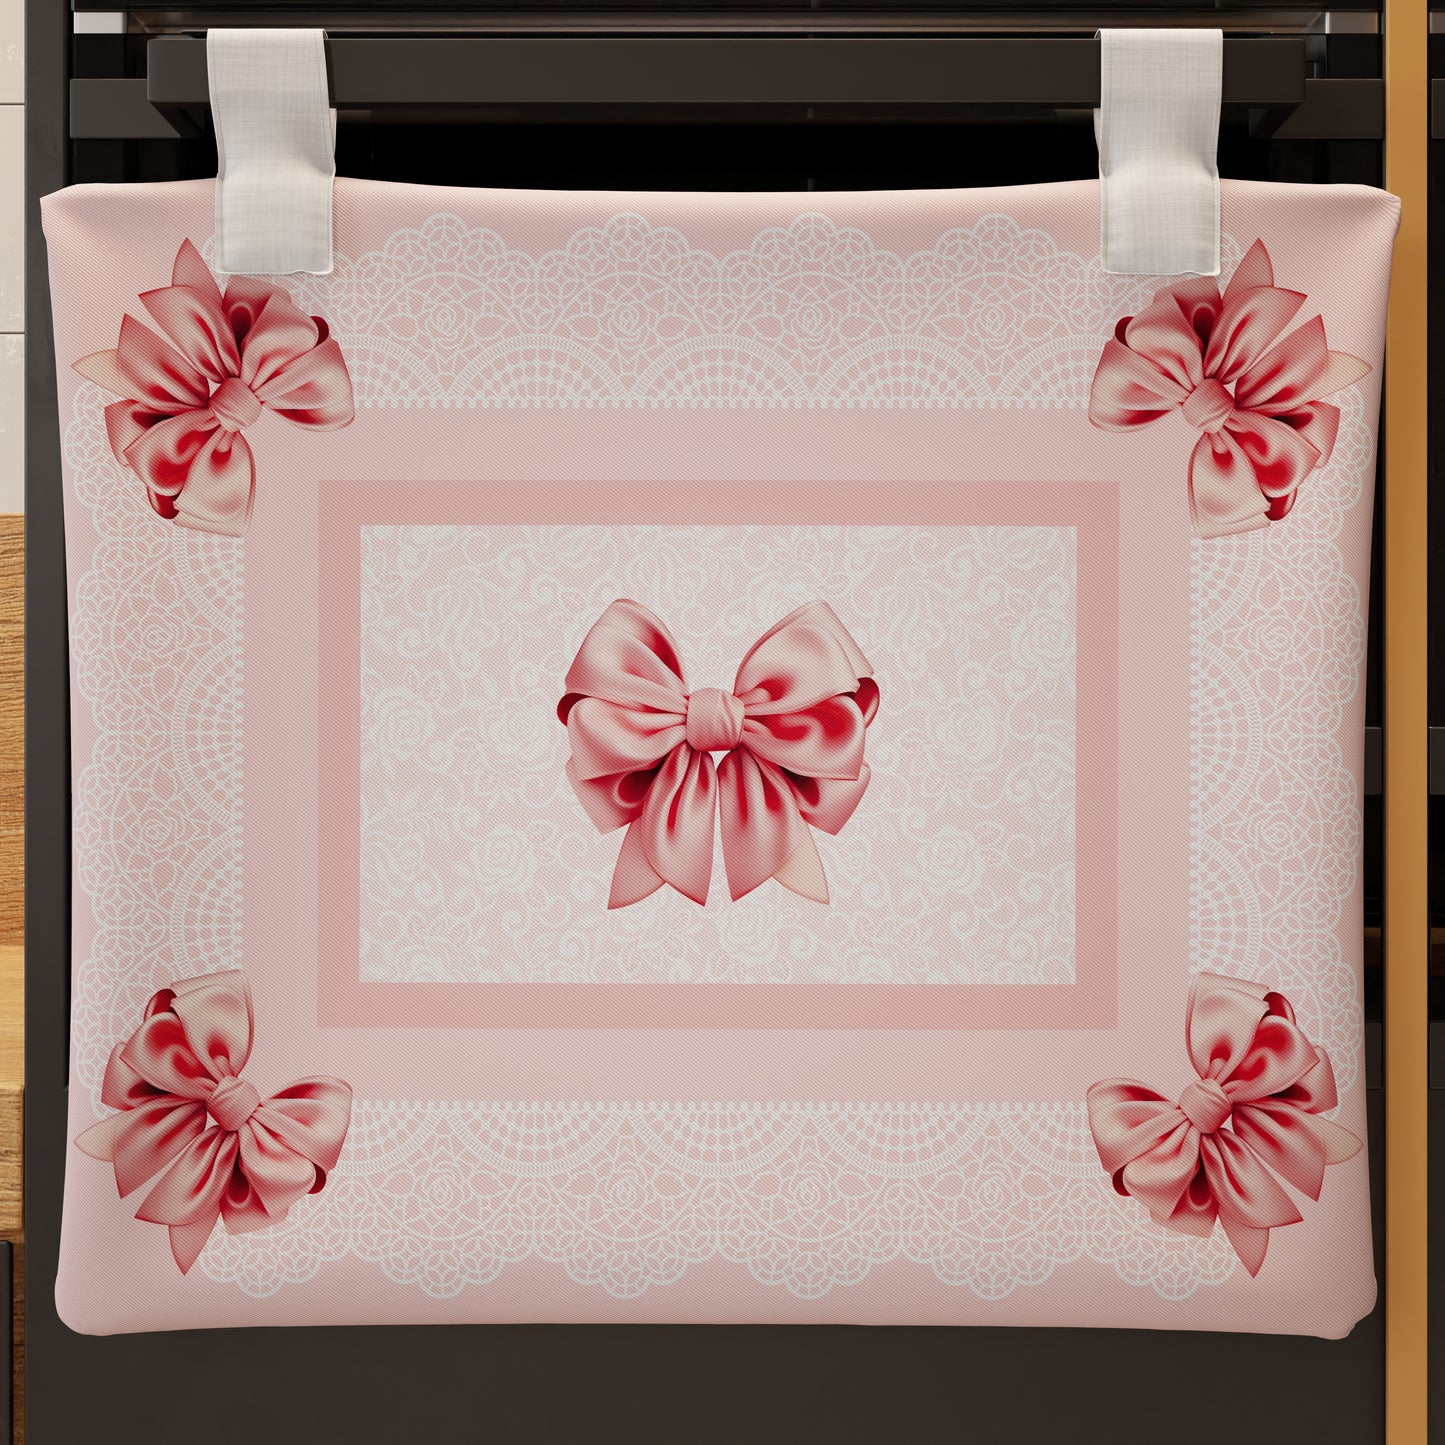 Oven Cover for Kitchen in Digital Print Bow 1pc 40x50cm